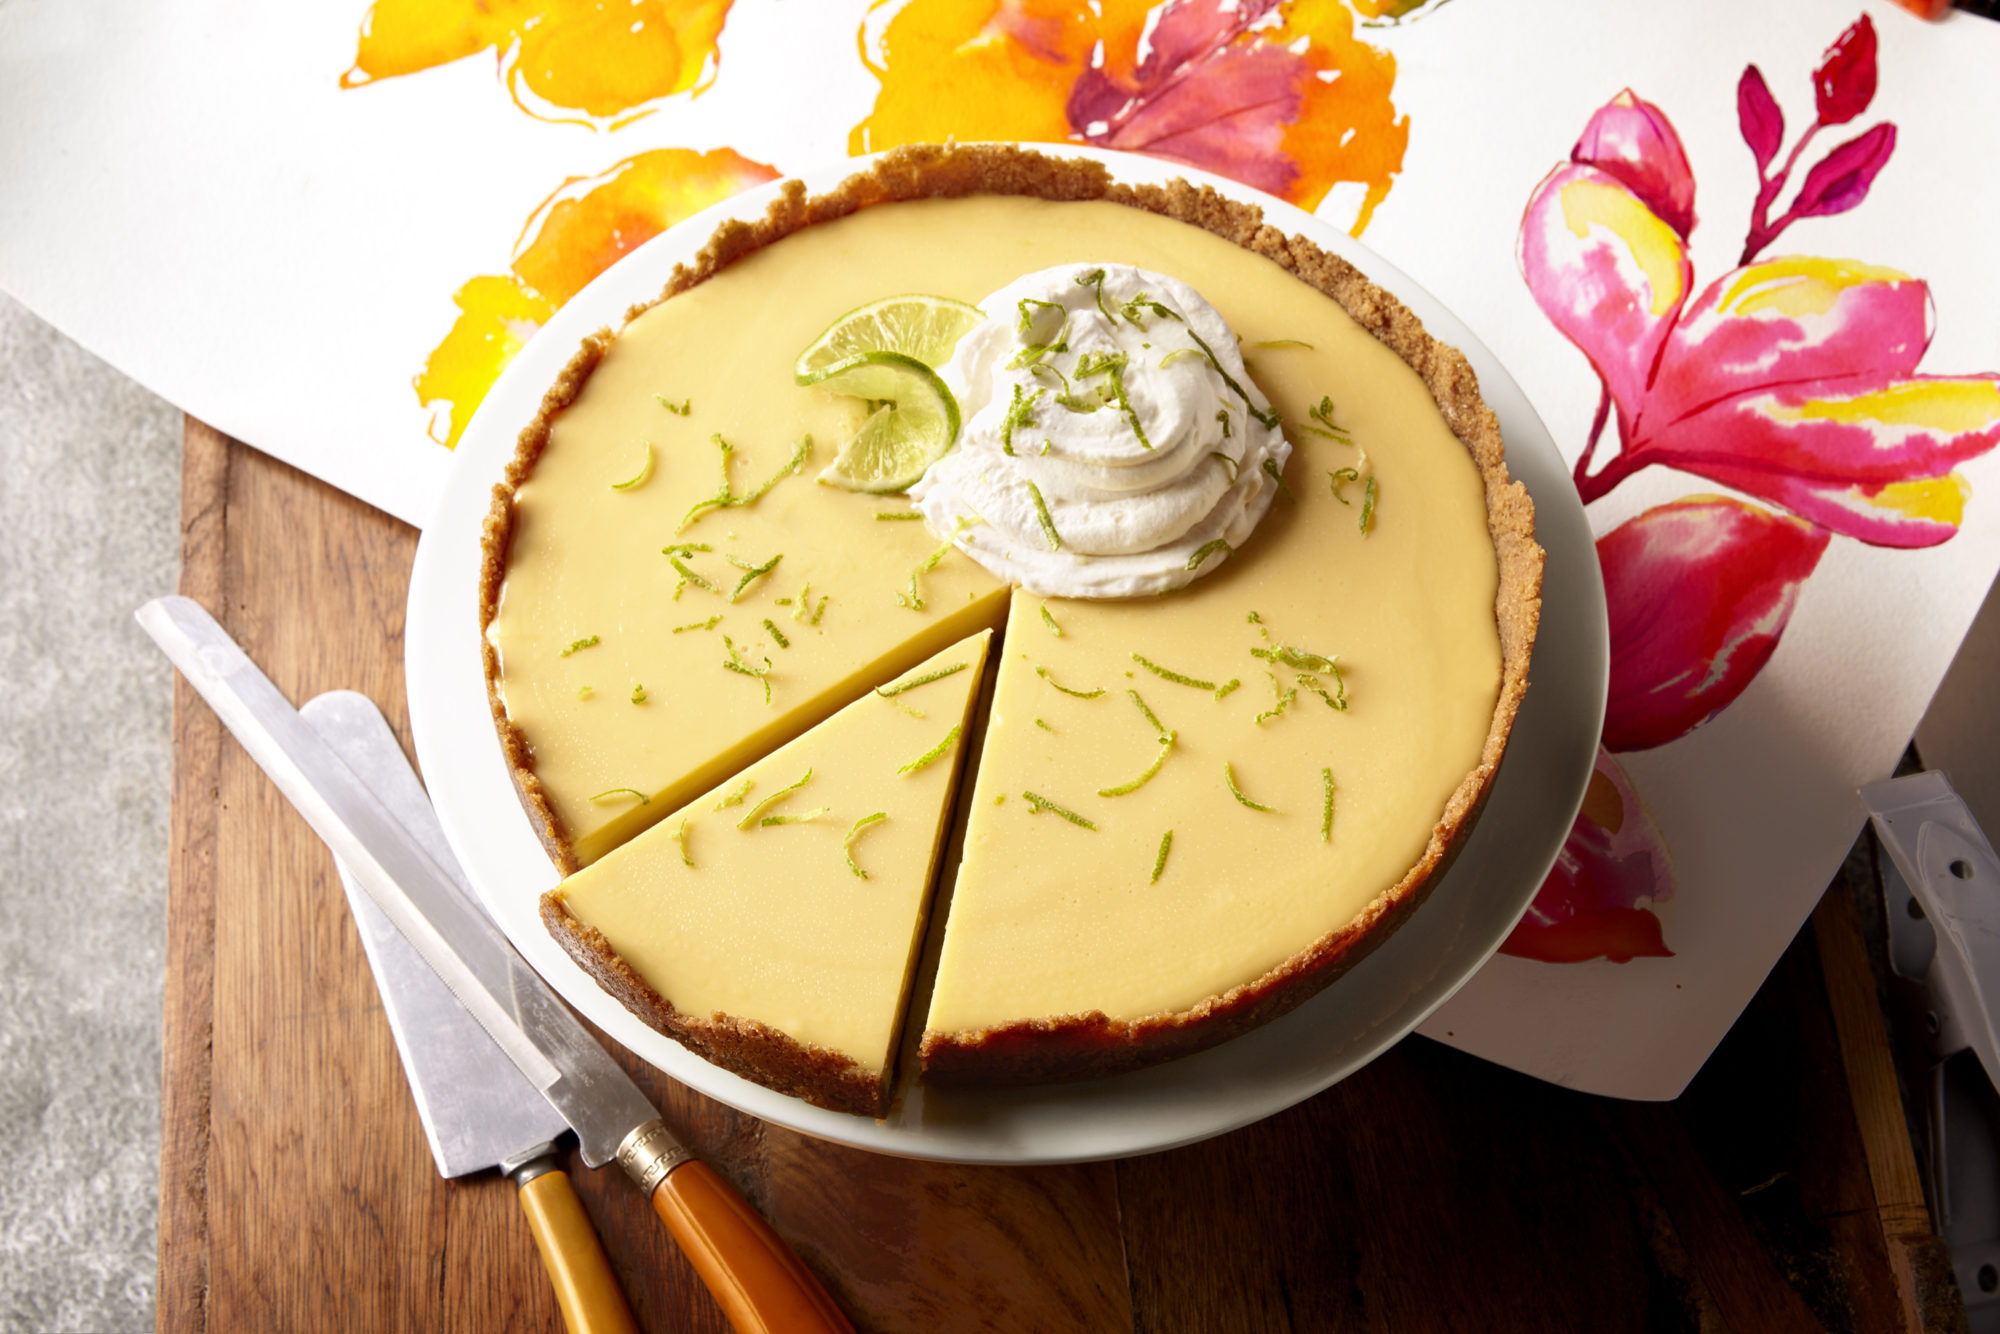 Our Favorite Recipe for Key Lime Pie